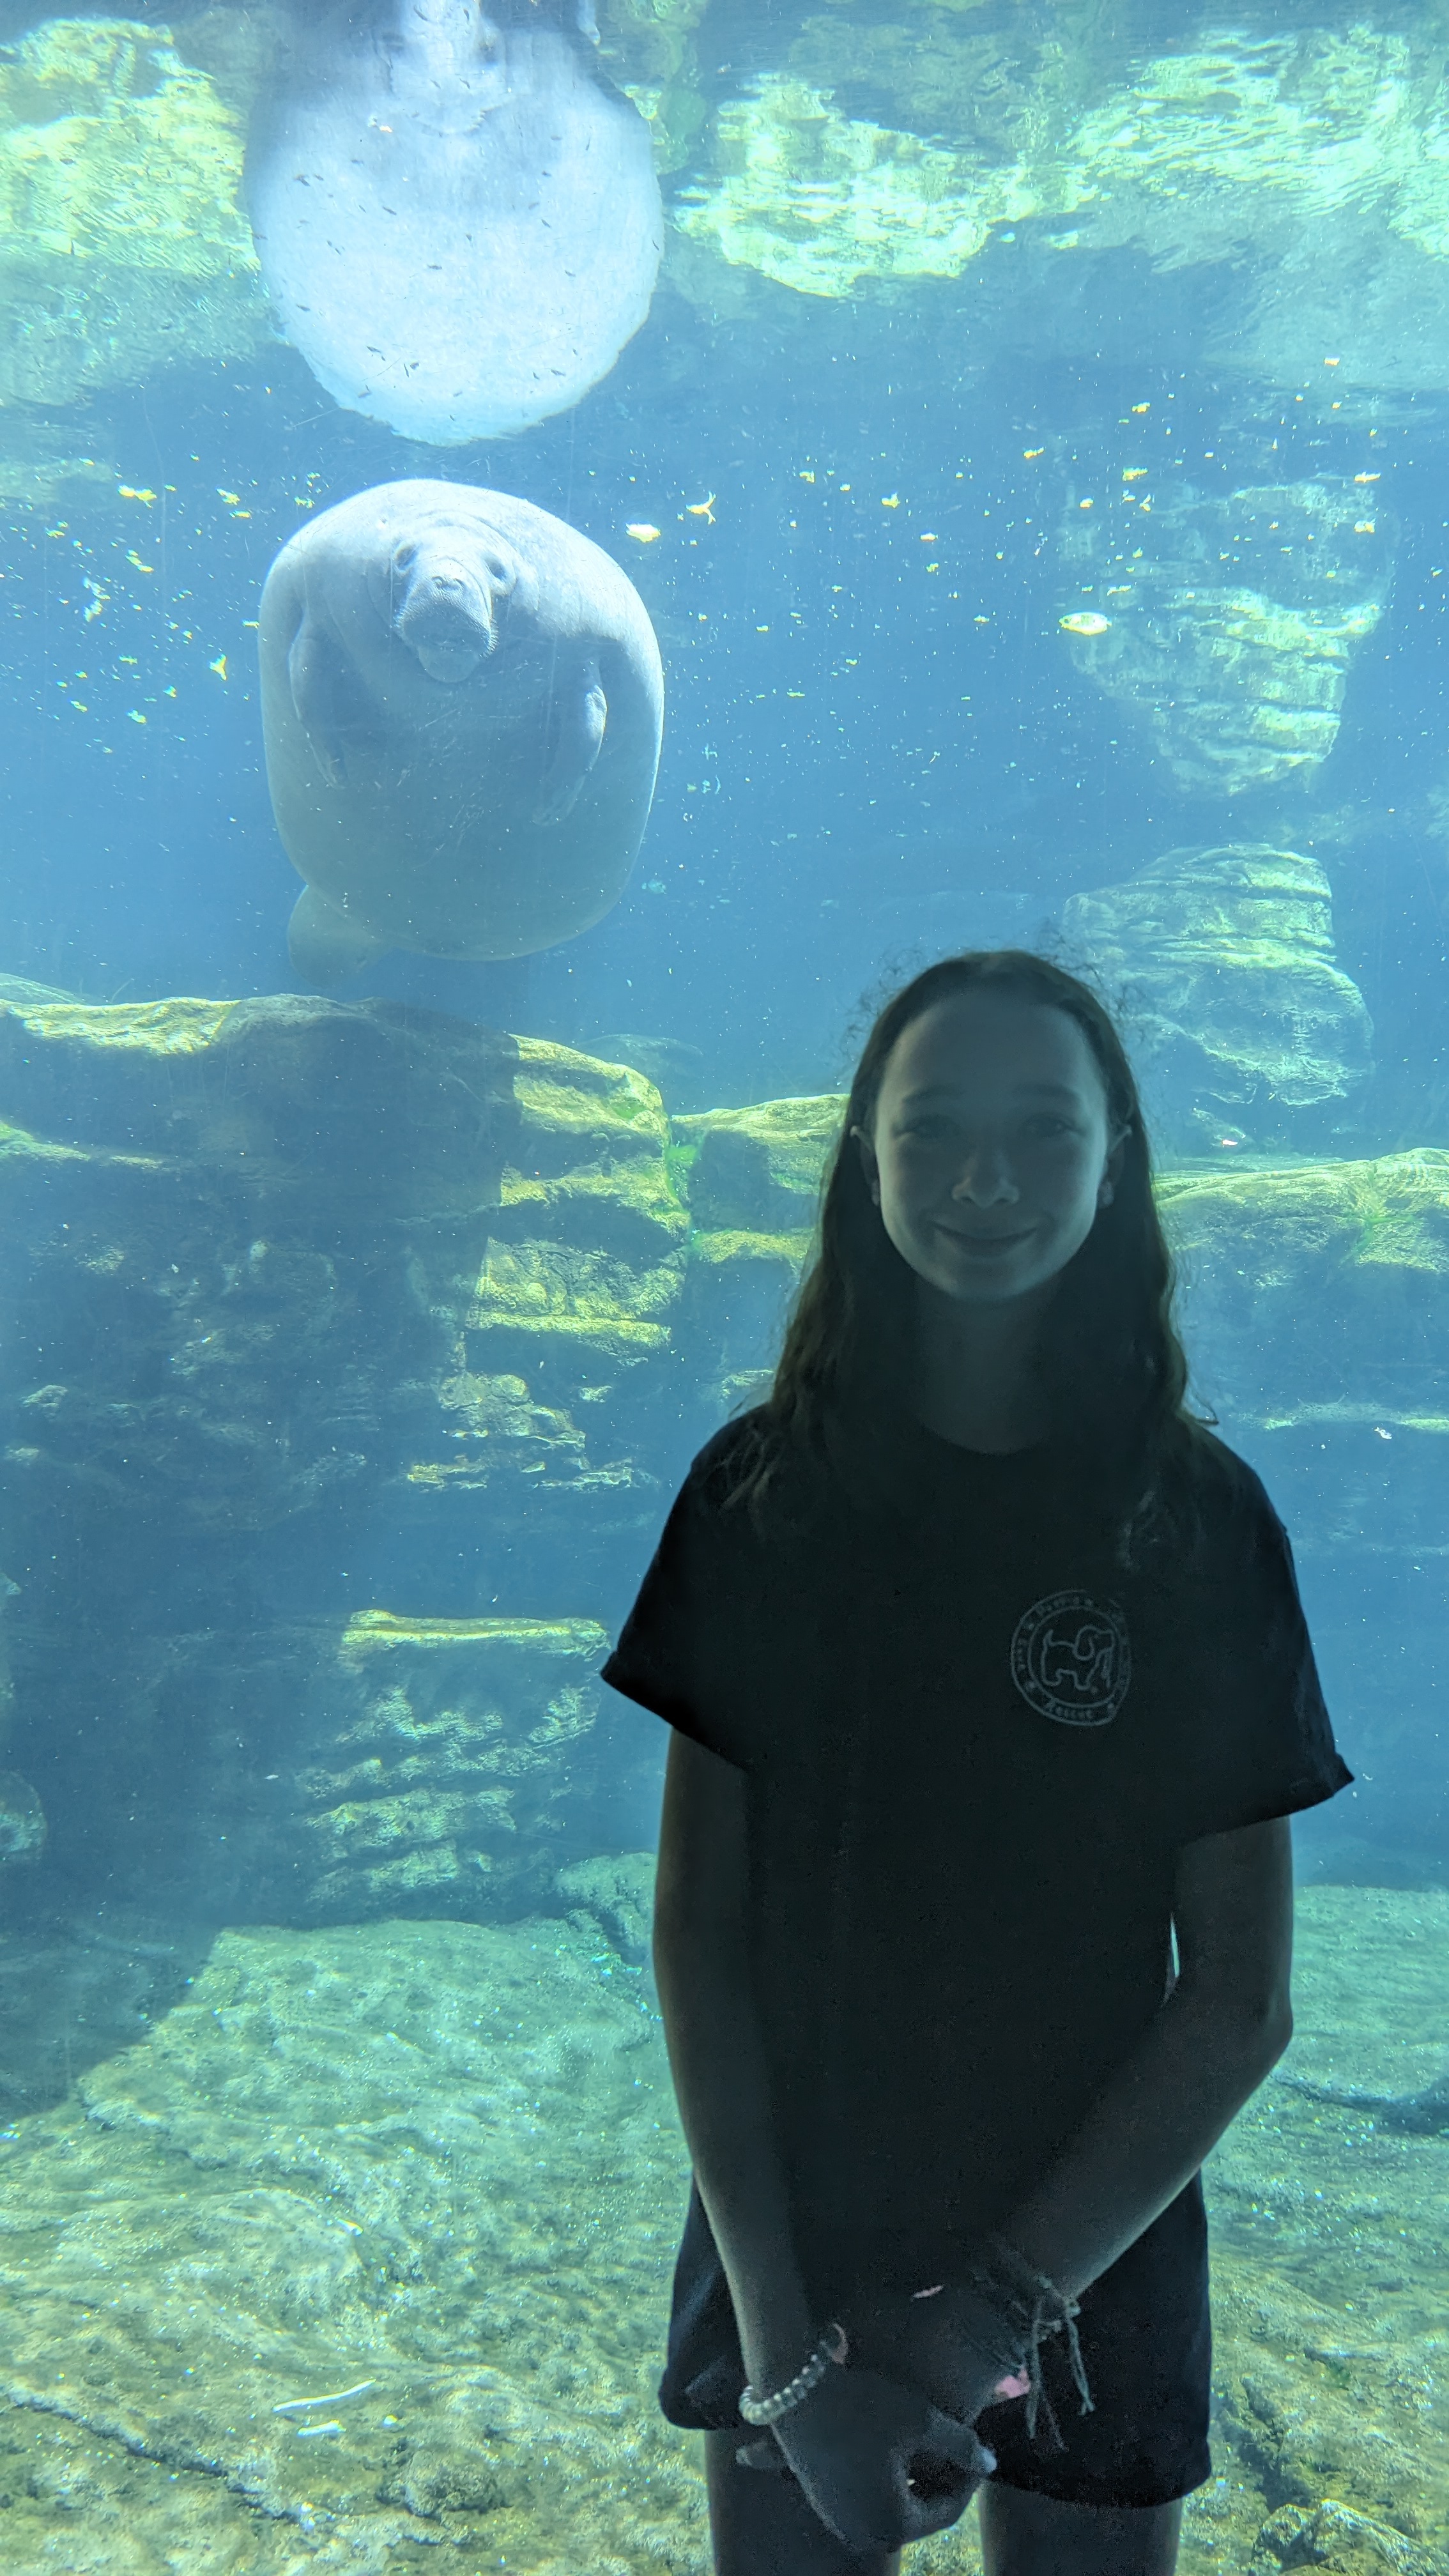 Daughter and a Manatee posing for a picture at Sea world Orlando.